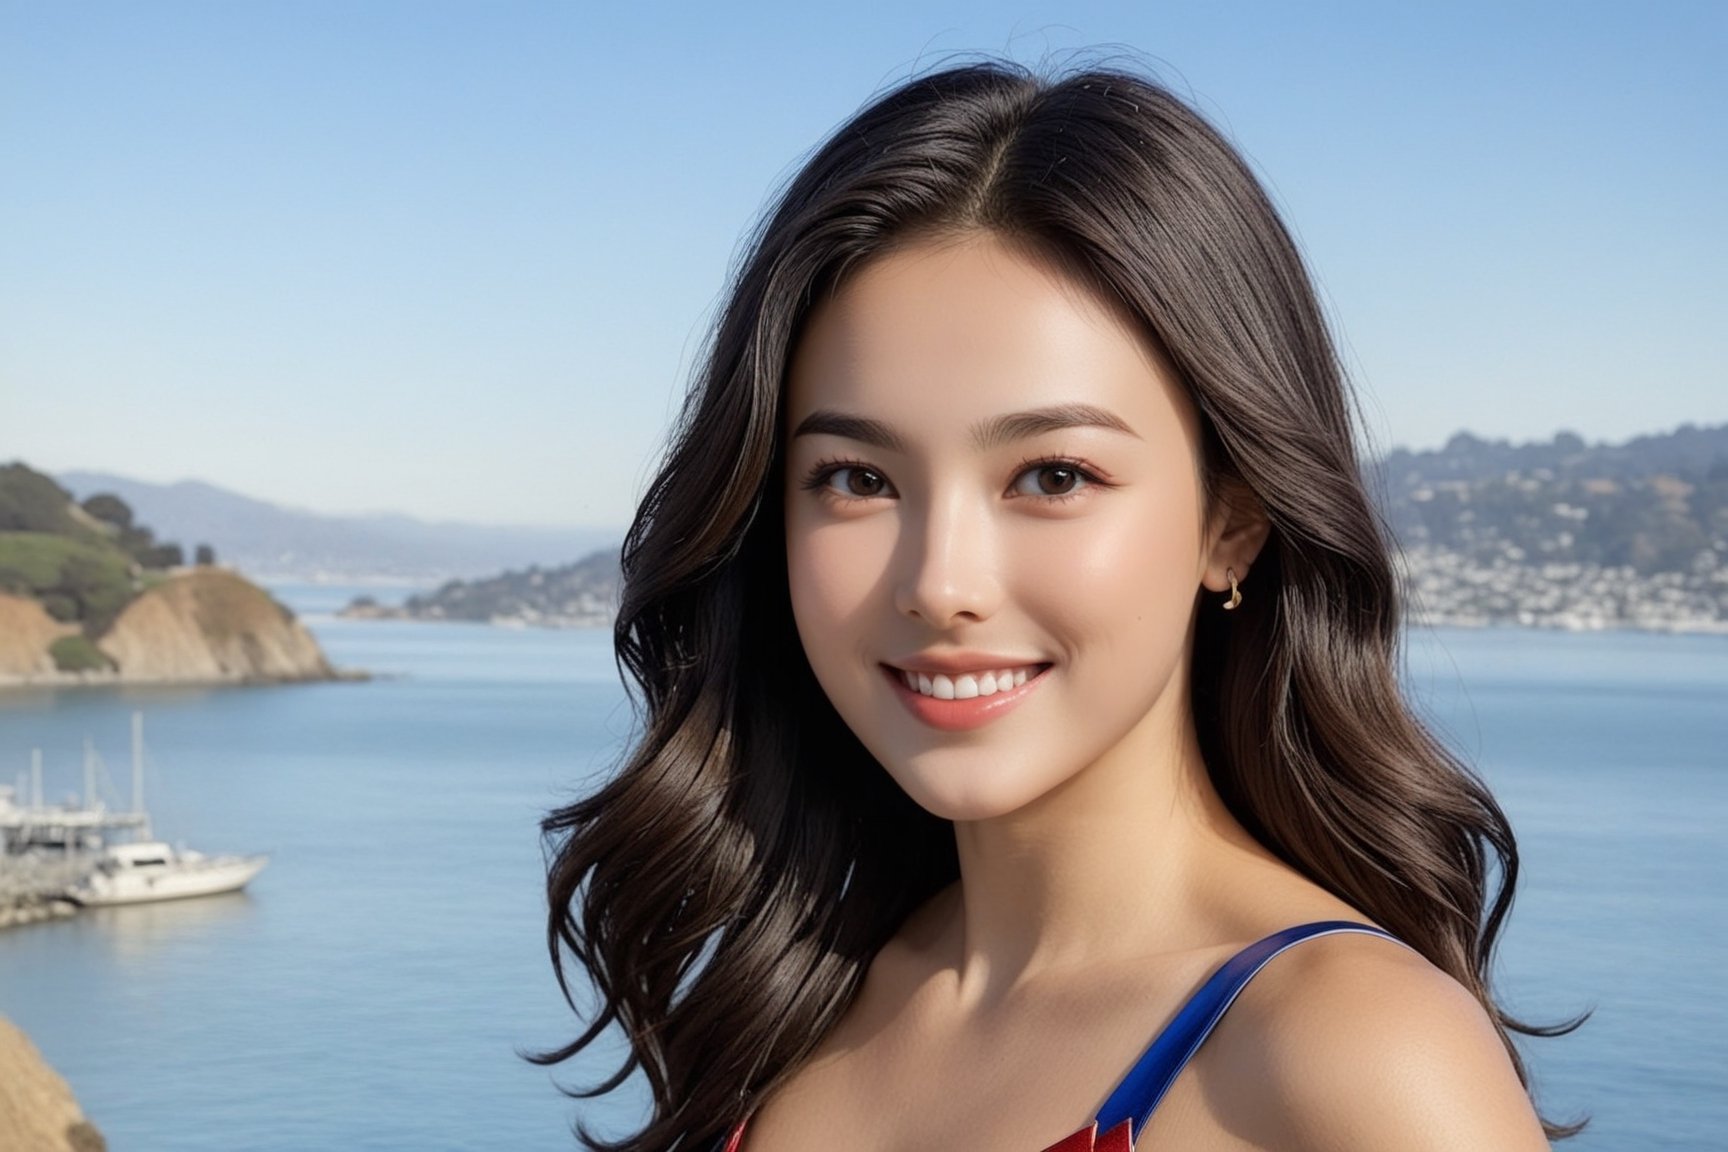 Hyper-Realistic photo of a girl,20yo,1girl,perfect female form,perfect body proportion,perfect anatomy,detailed exquisite face,soft shiny skin,smile,mesmerizing,short hair,small earrings,necklaces
BREAK
backdrop of a beautiful Sausalito in California,harbor,boat,ocean,bridge,(fullbody:1.3),(distant view:1.2),(heels:1.3),(model pose)
BREAK
(rule of thirds:1.3),perfect composition,studio photo,trending on artstation,(Masterpiece,Best quality,32k,UHD:1.5),(sharp focus,high contrast,HDR,hyper-detailed,intricate details,ultra-realistic,award-winning photo,ultra-clear,kodachrome 800:1.3),(chiaroscuro lighting,soft rim lighting:1.2),by Karol Bak,Antonio Lopez,Gustav Klimt and Hayao Miyazaki,photo_b00ster,real_booster,ani_booster,wonder-woman-xl,song-hyegyo-xl